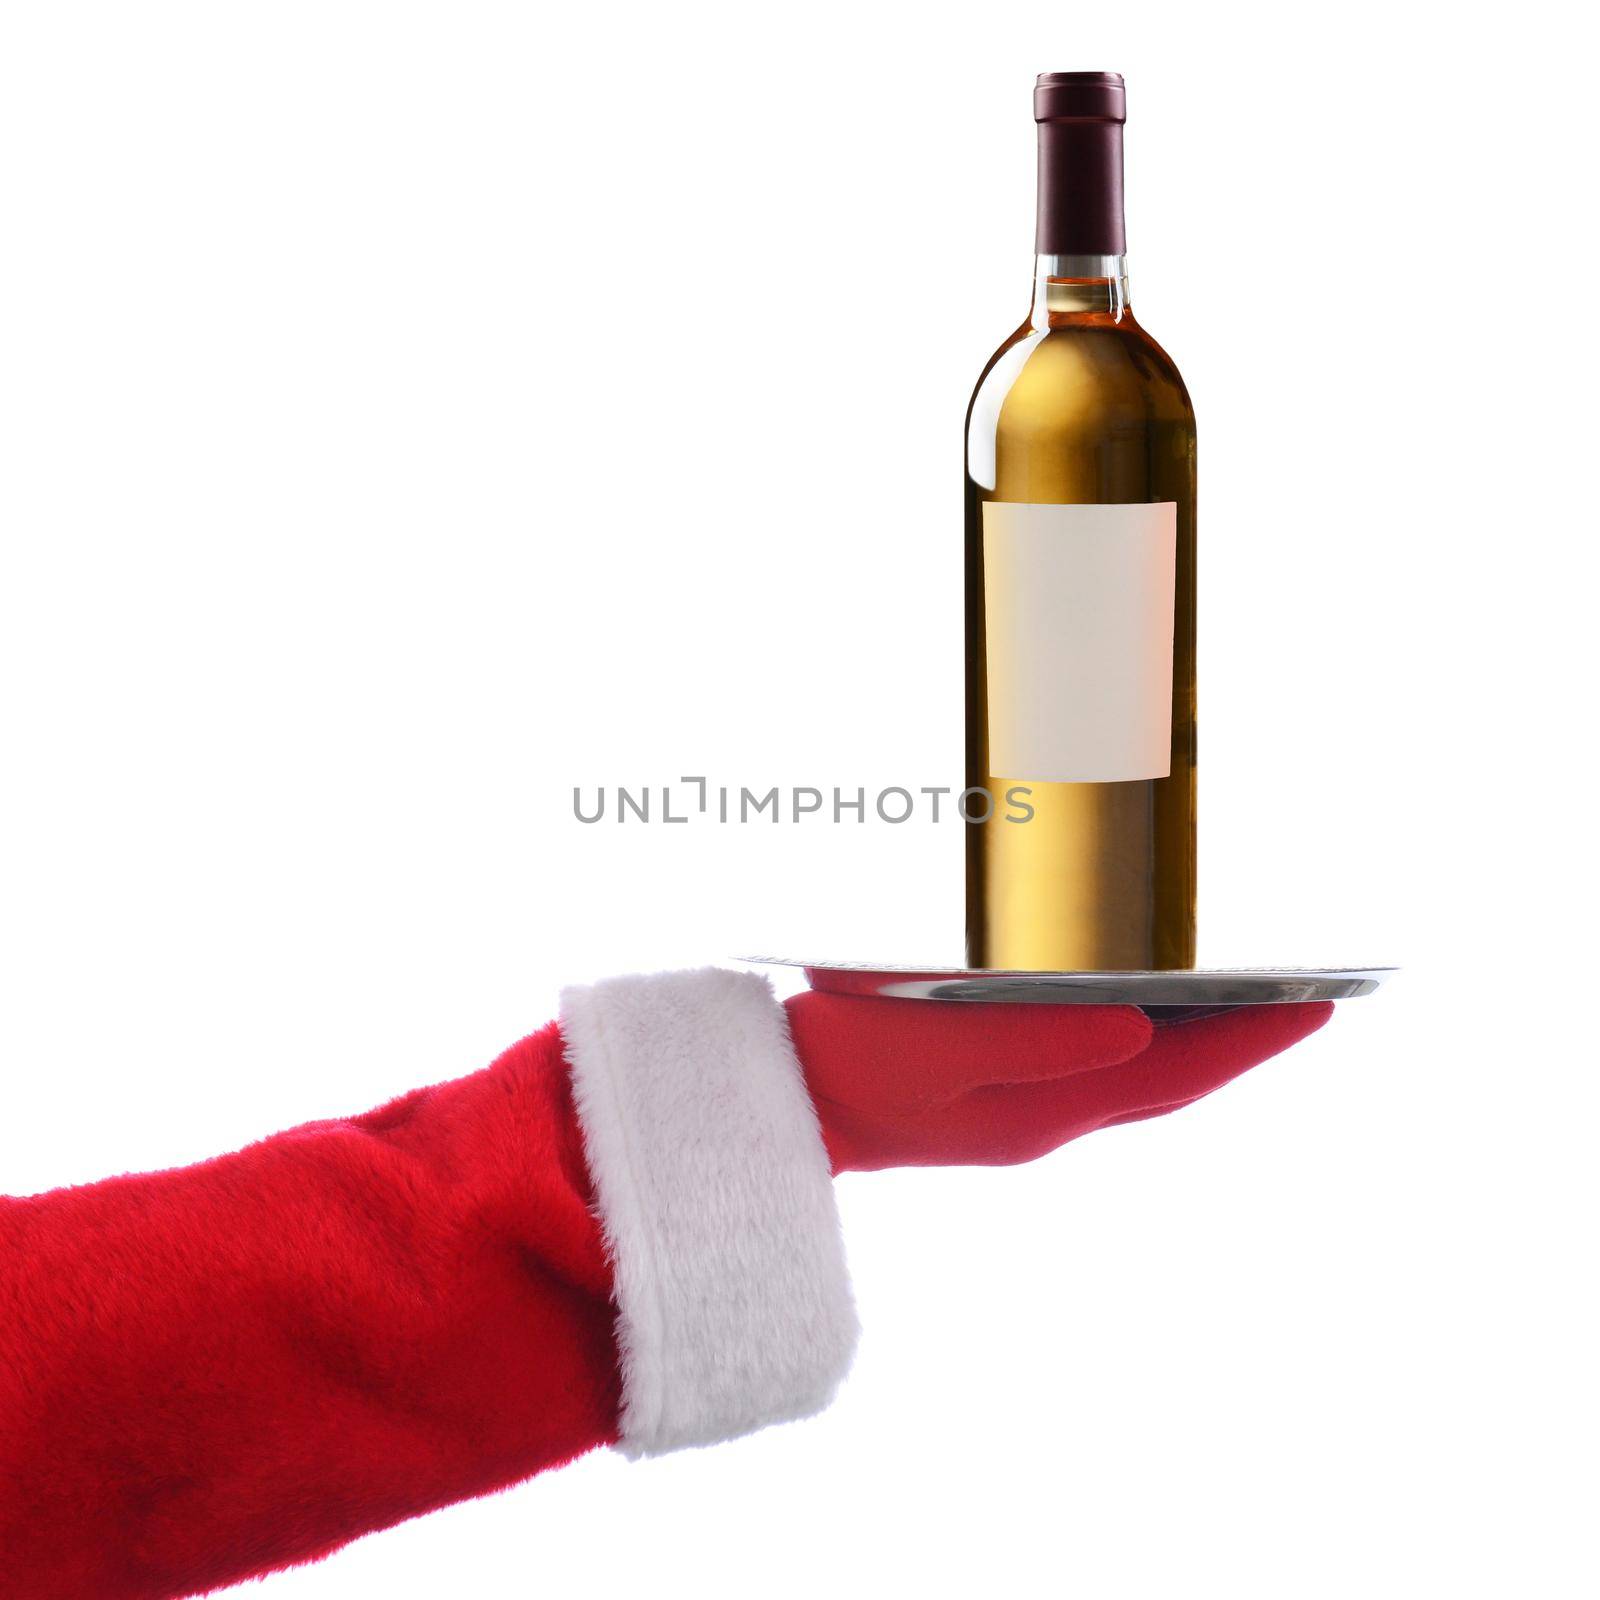 Santa Claus outstretched arm holding a Wine Bottle on a silver serving tray. Vertical format over a white background.